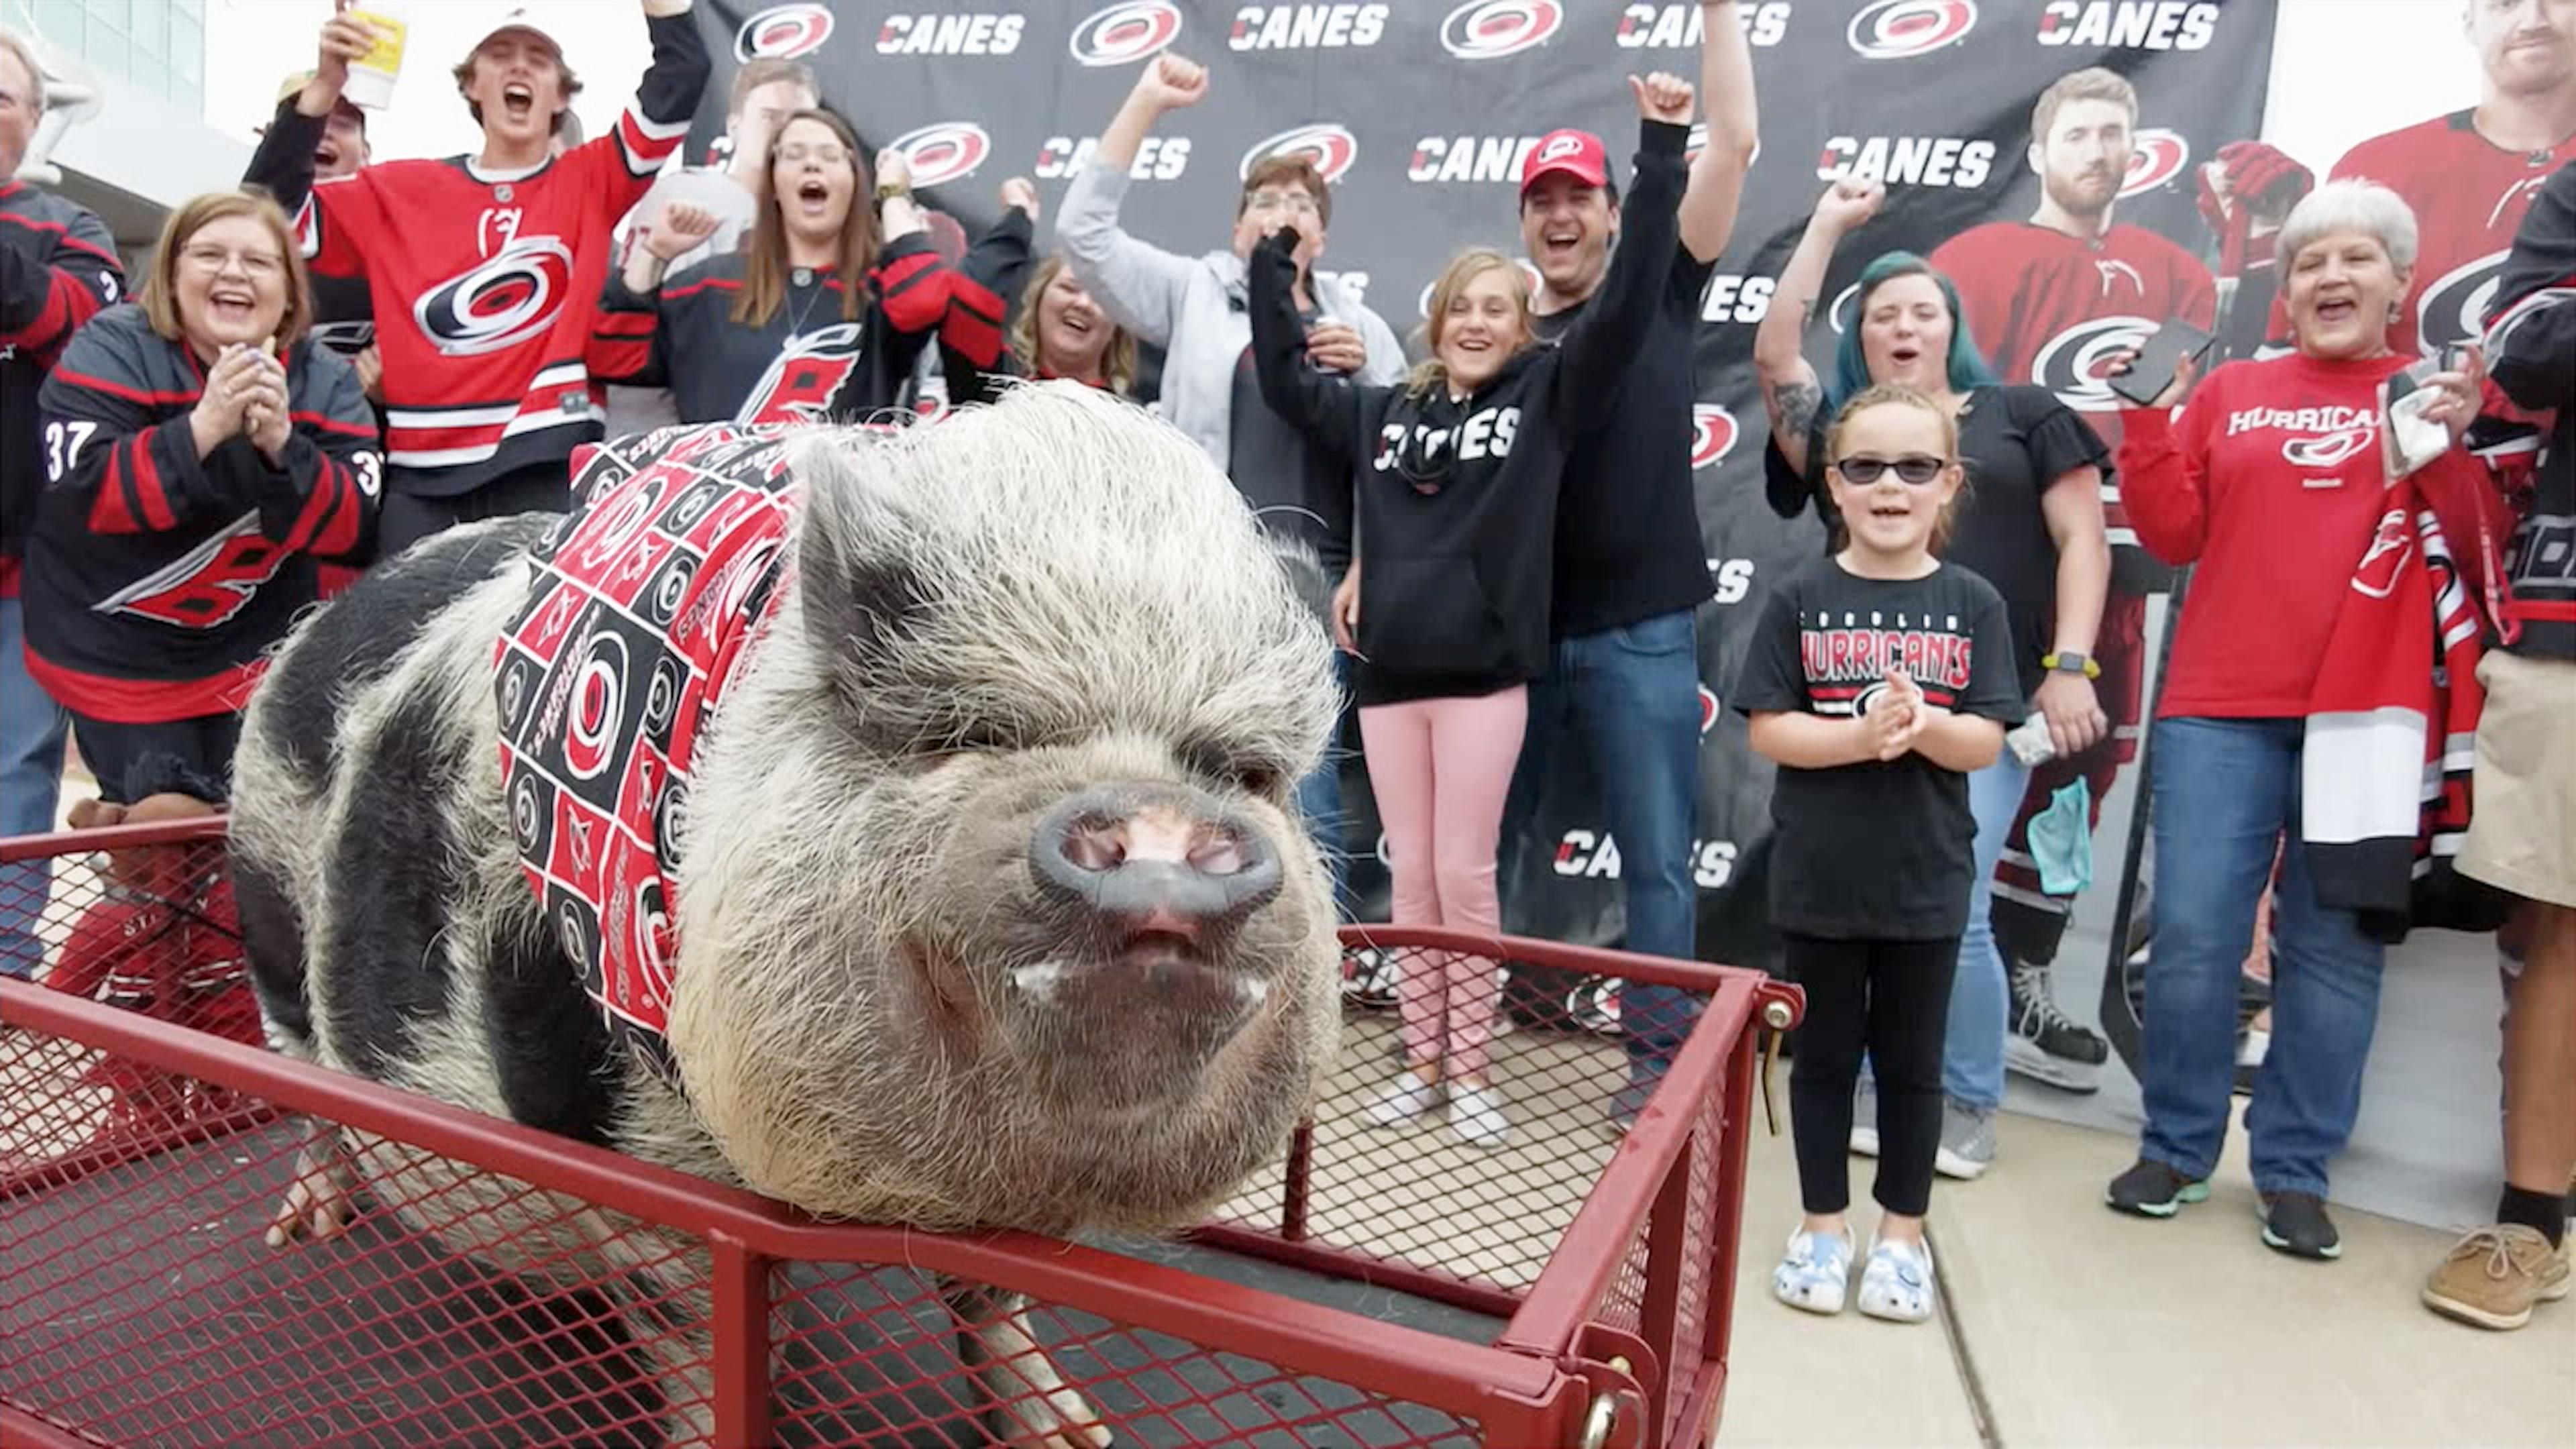 Hamilton the Pig in a red wagon with North Carolina Hurricanes fans behind him.